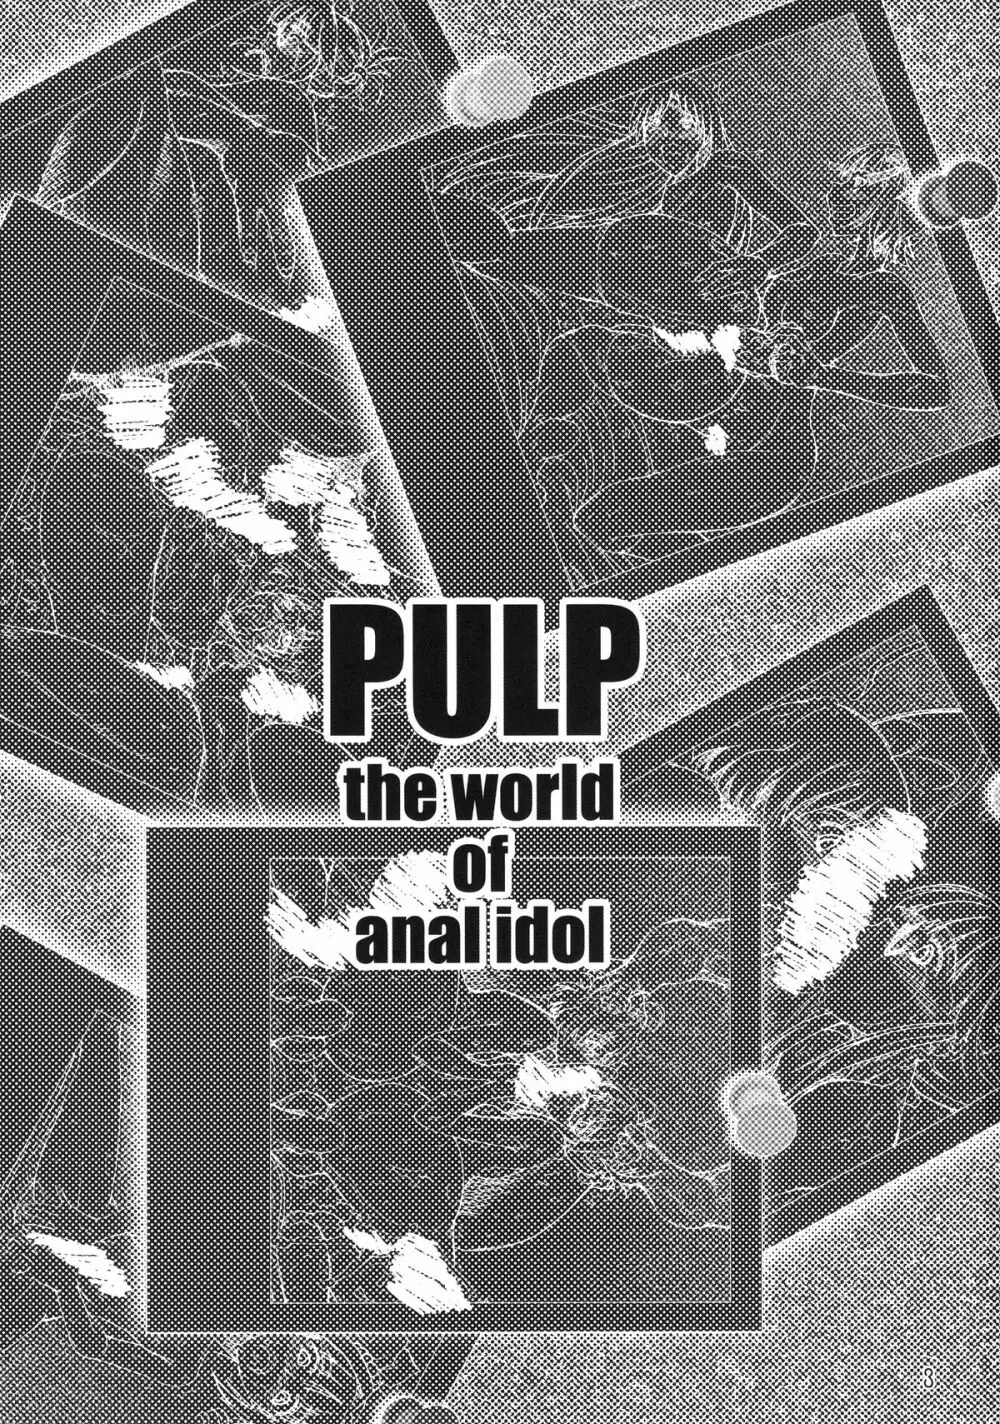 PULP the world of anal idol Page.3